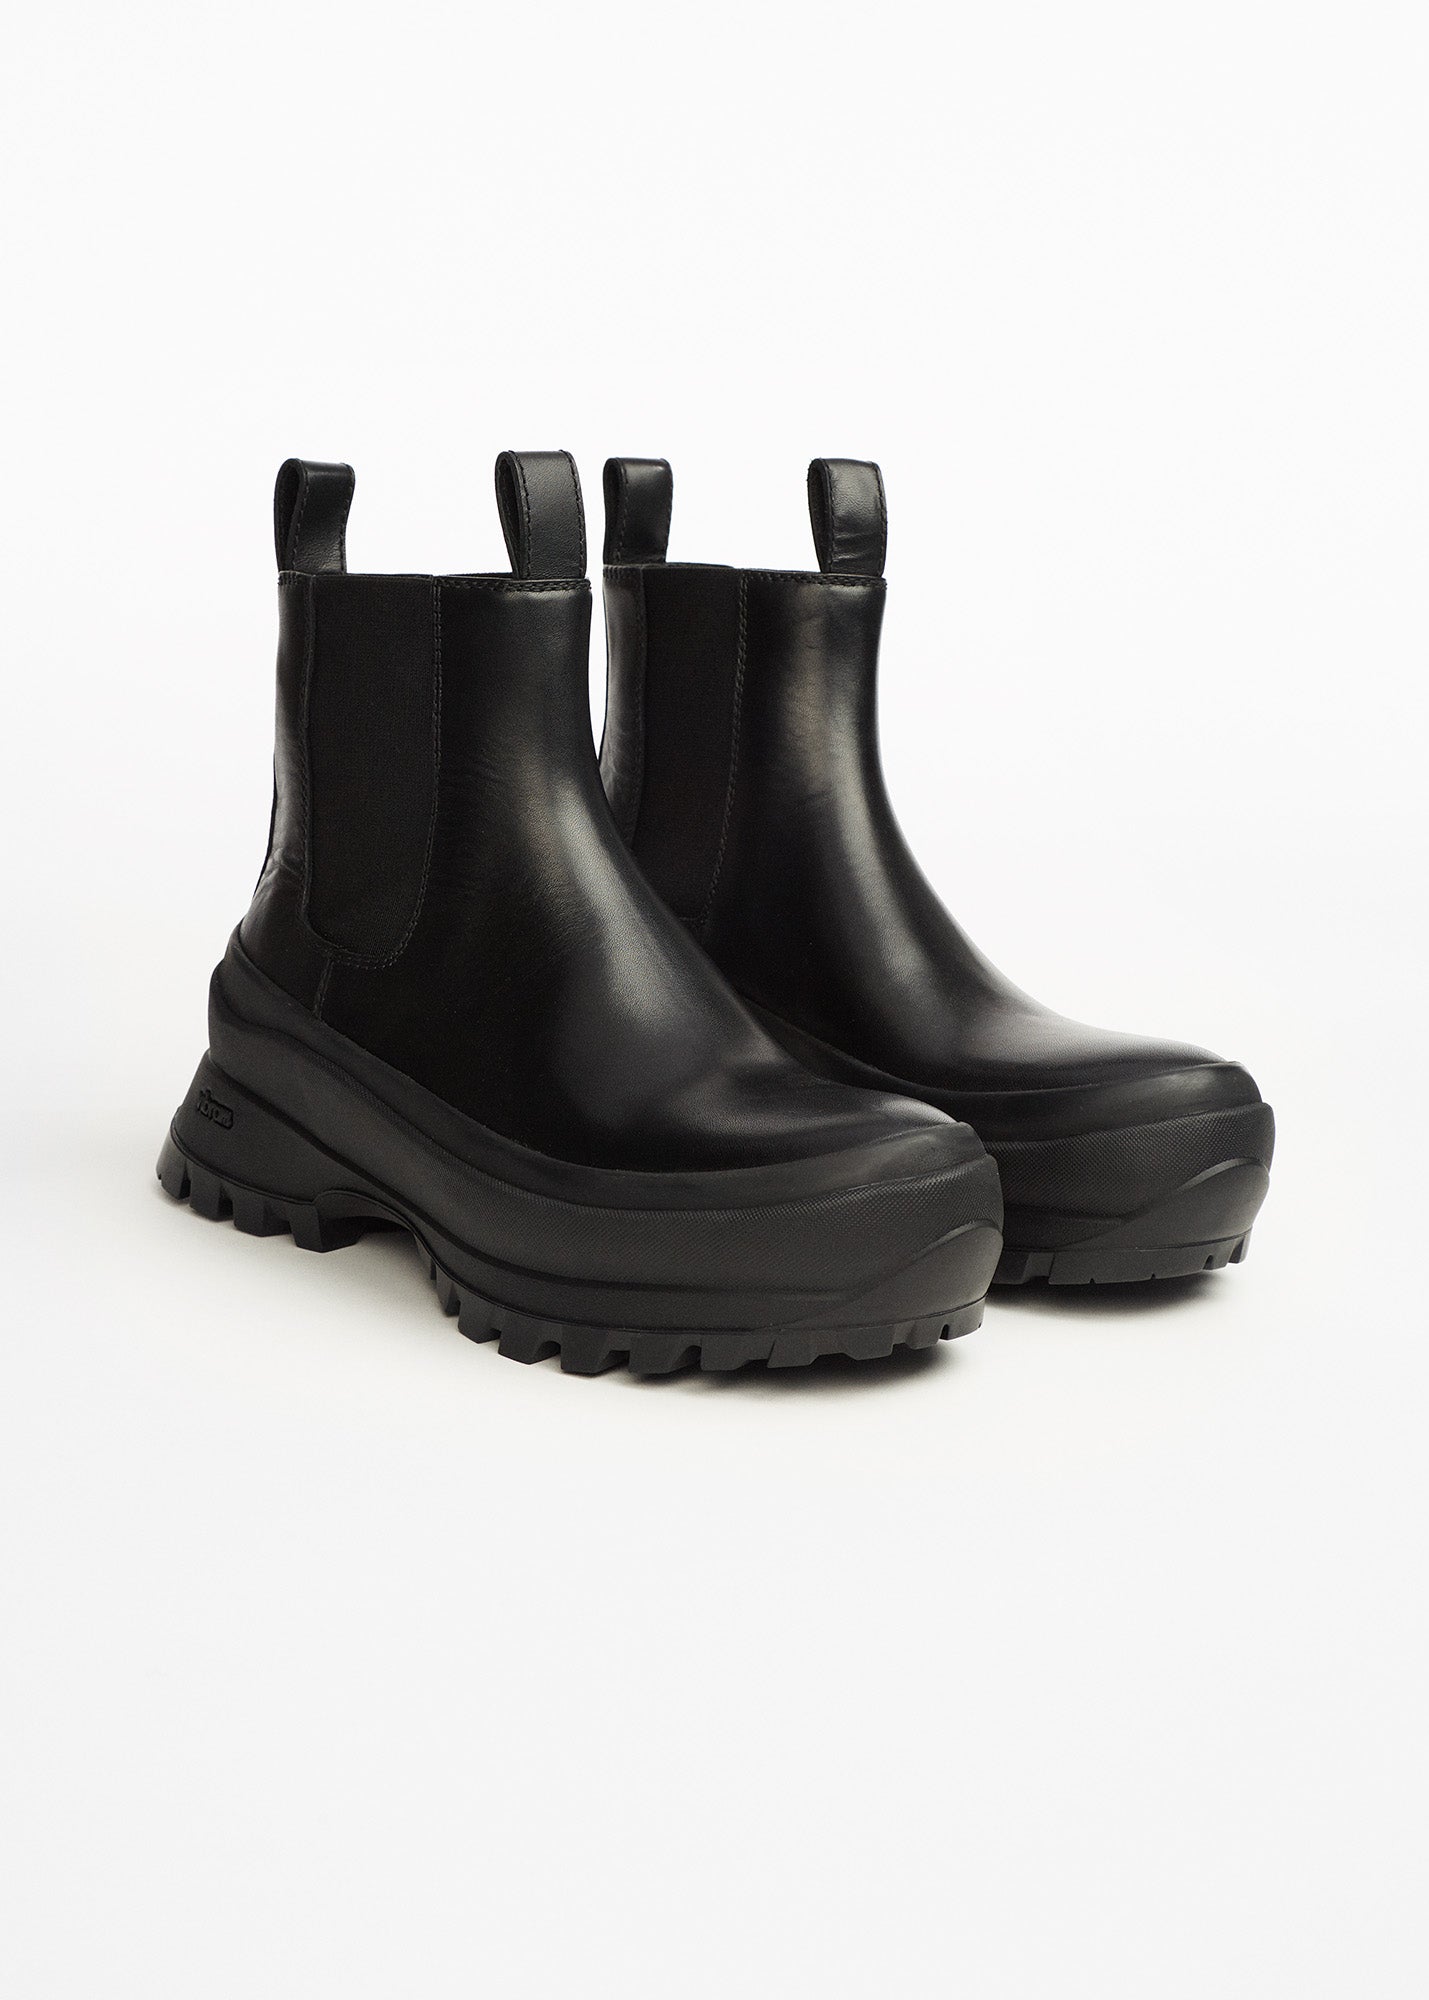 Chelsea Ankle Boots Black